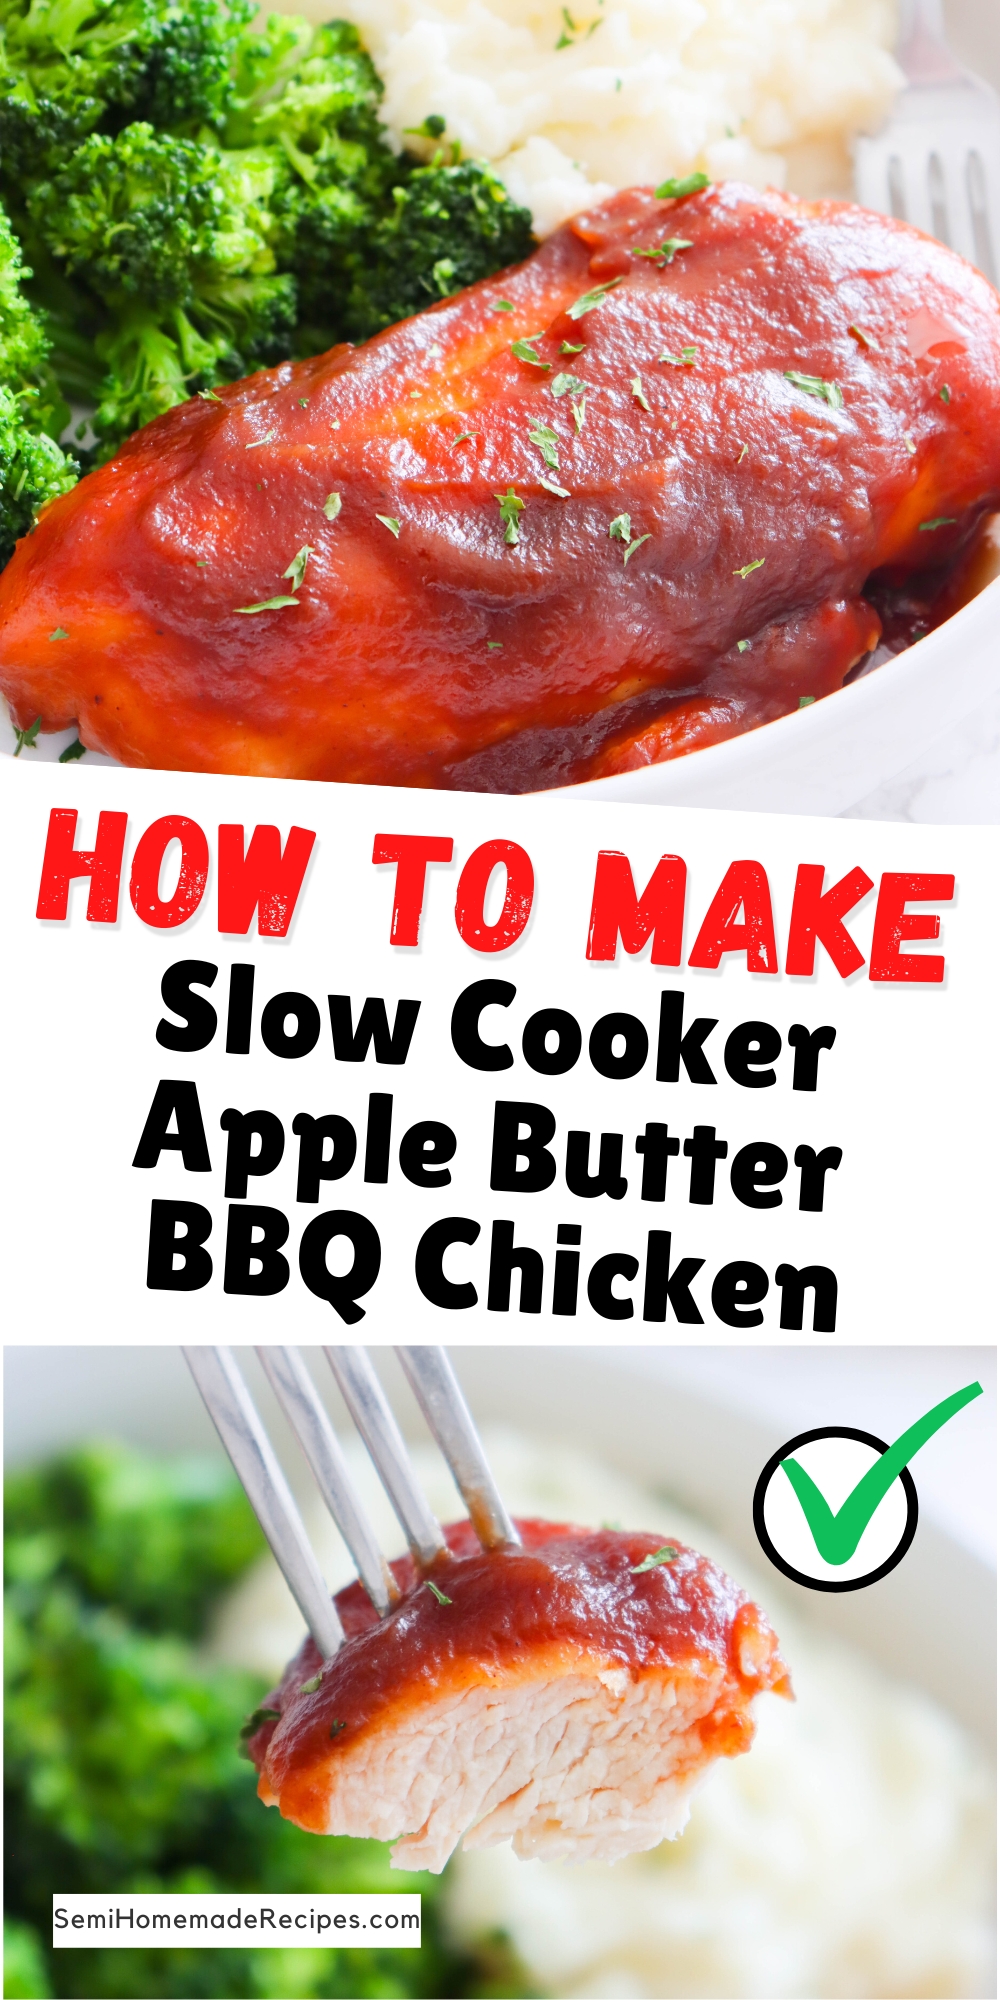 Feeling stressed or overwhelmed? Slow cooker apple butter chicken is the perfect comfort food. It's warm, cozy, and packed with flavor. Make a batch for yourself or share it with loved ones for a heartwarming meal that will soothe your soul.